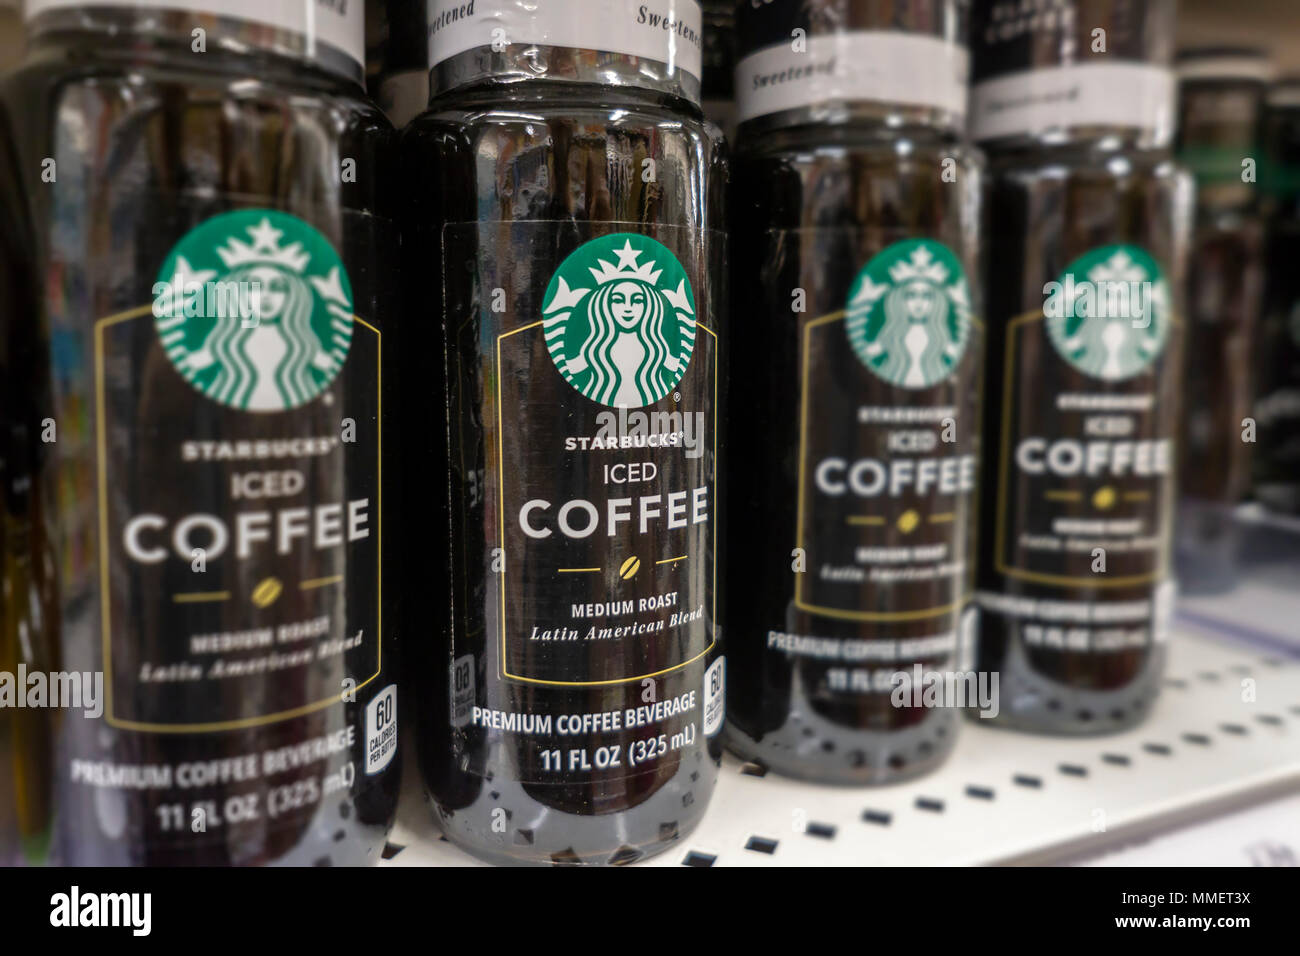 Bottles of Starbucks iced coffee are seen on a supermarket shelf in New York on Friday, May 4, 2018. NestlŽ is reported to be in talks to purchase Starbucks' grocery business. The units that sell beans and drinks in supermarkets and groceries are involved and not any of the stores. NestlŽ is the world's largest packaged food company. (© Richard B. Levine) Stock Photo